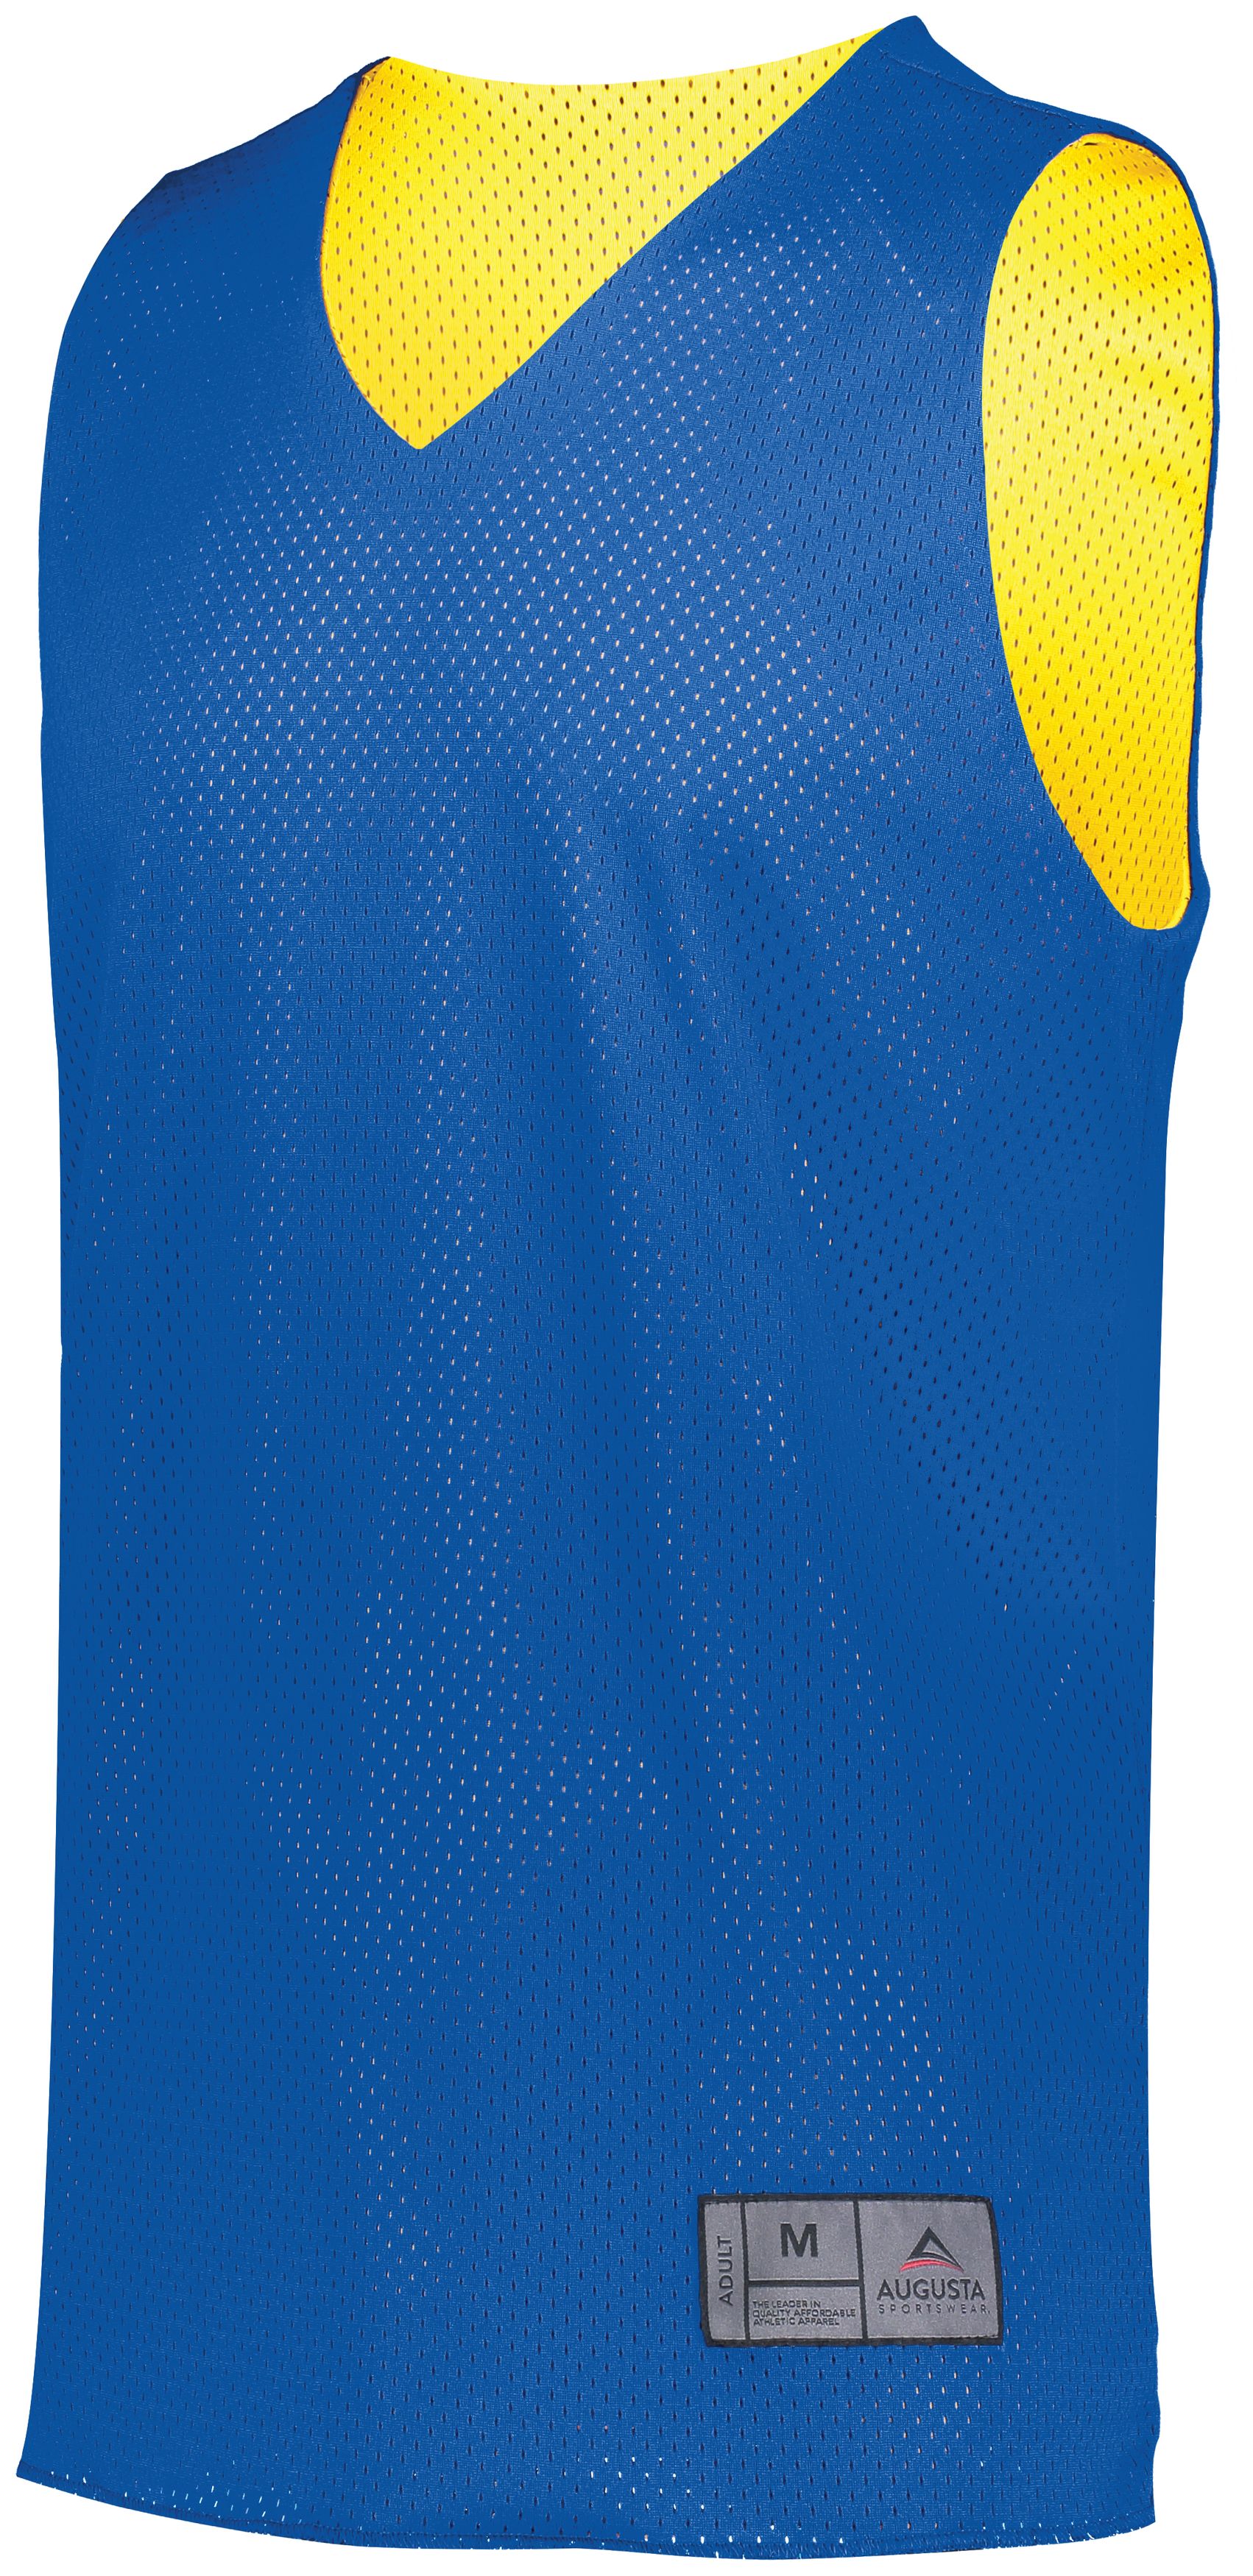 Gloucester Saxons Basketball Academy SNR Reversible Training Jersey